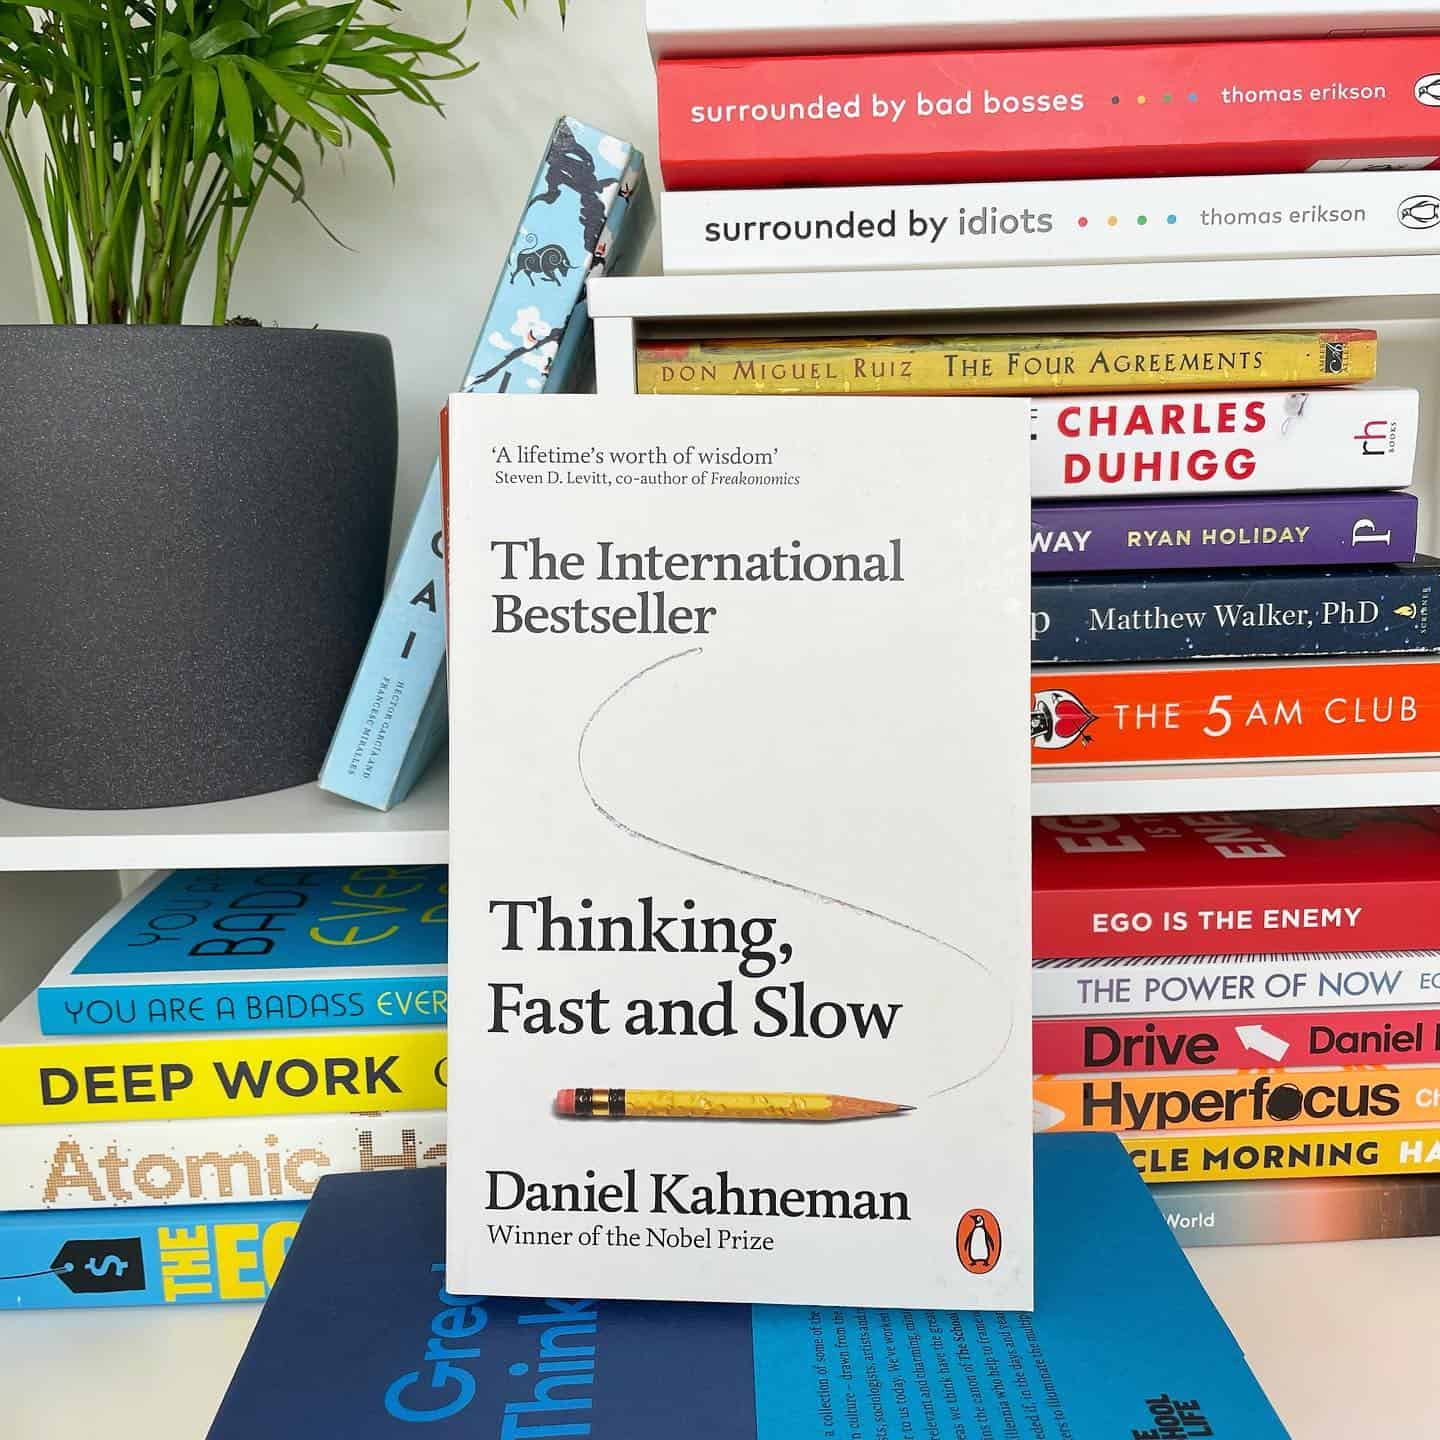 Thinking Fast and Slow book by Daniel Kahneman